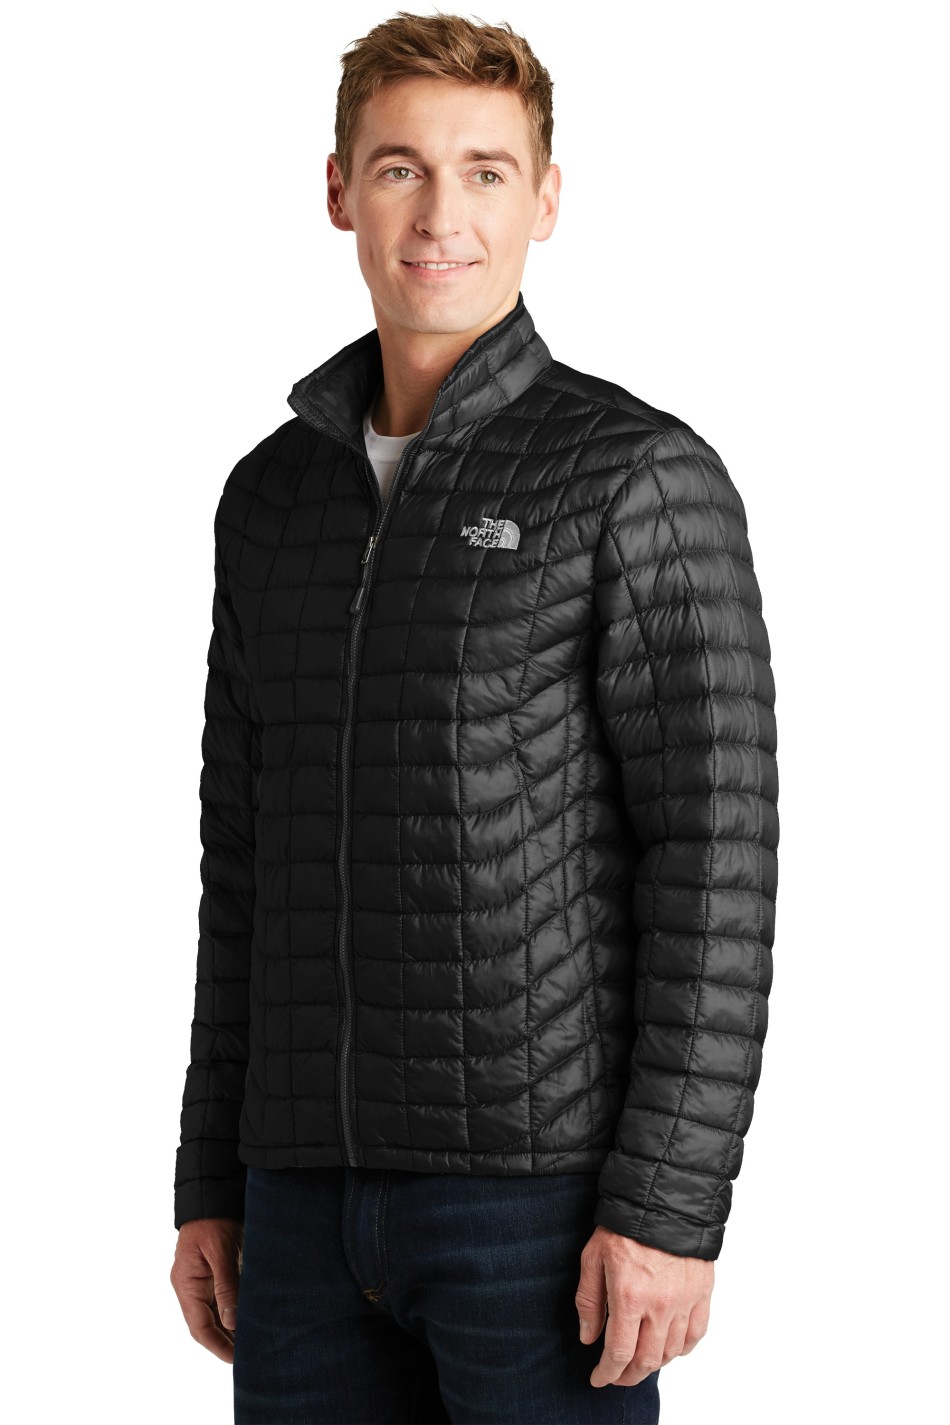 thermoball men's jacket